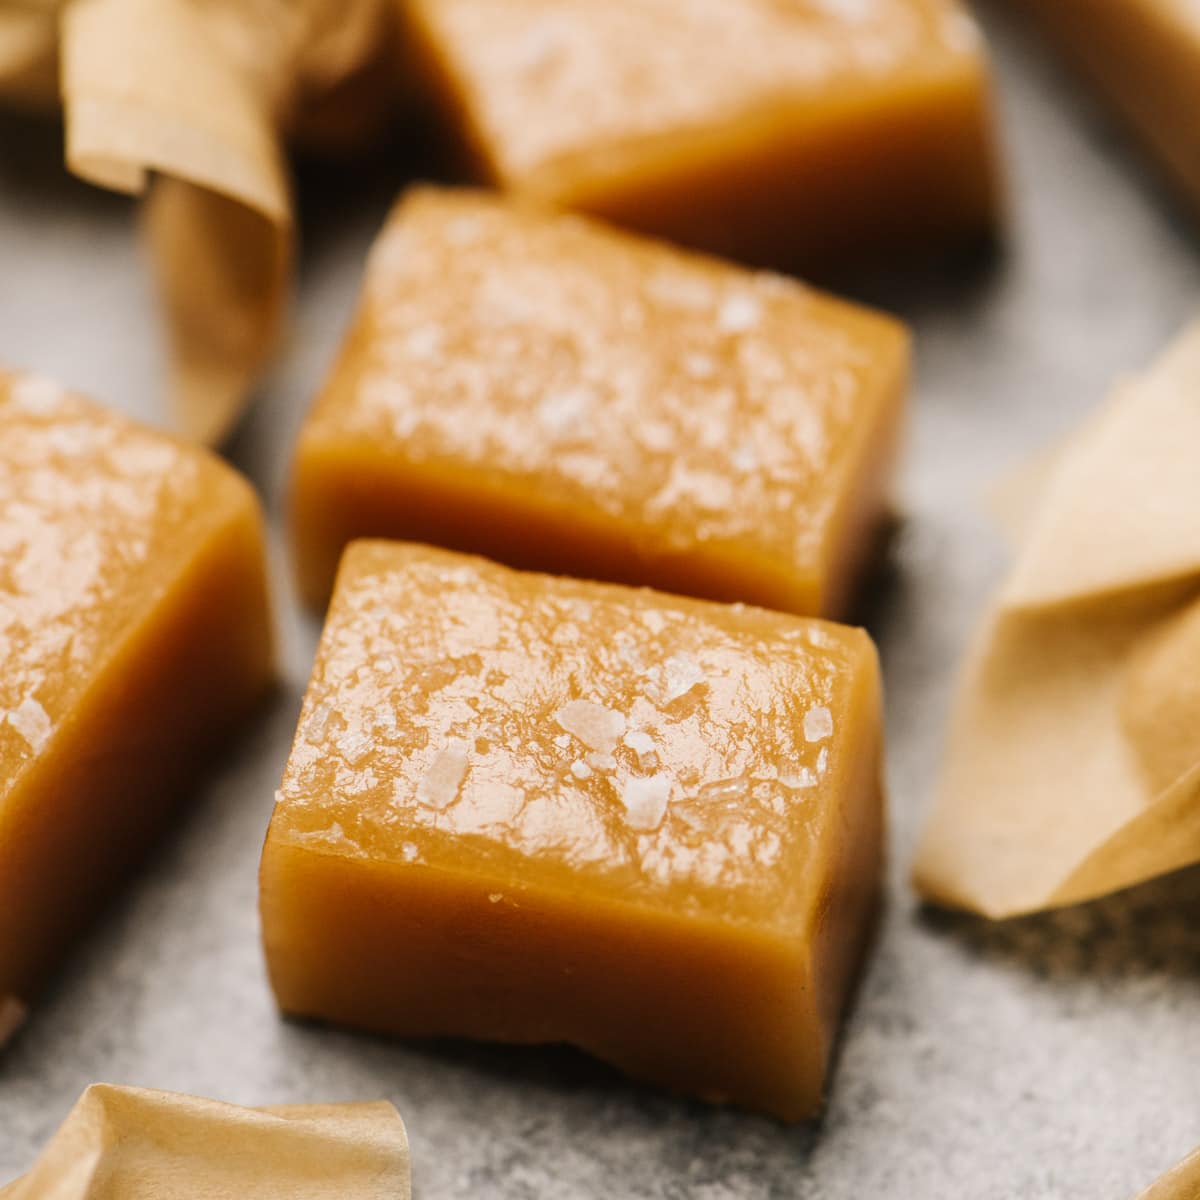 Grandma's Homemade Caramels - The Stay At Home Chef